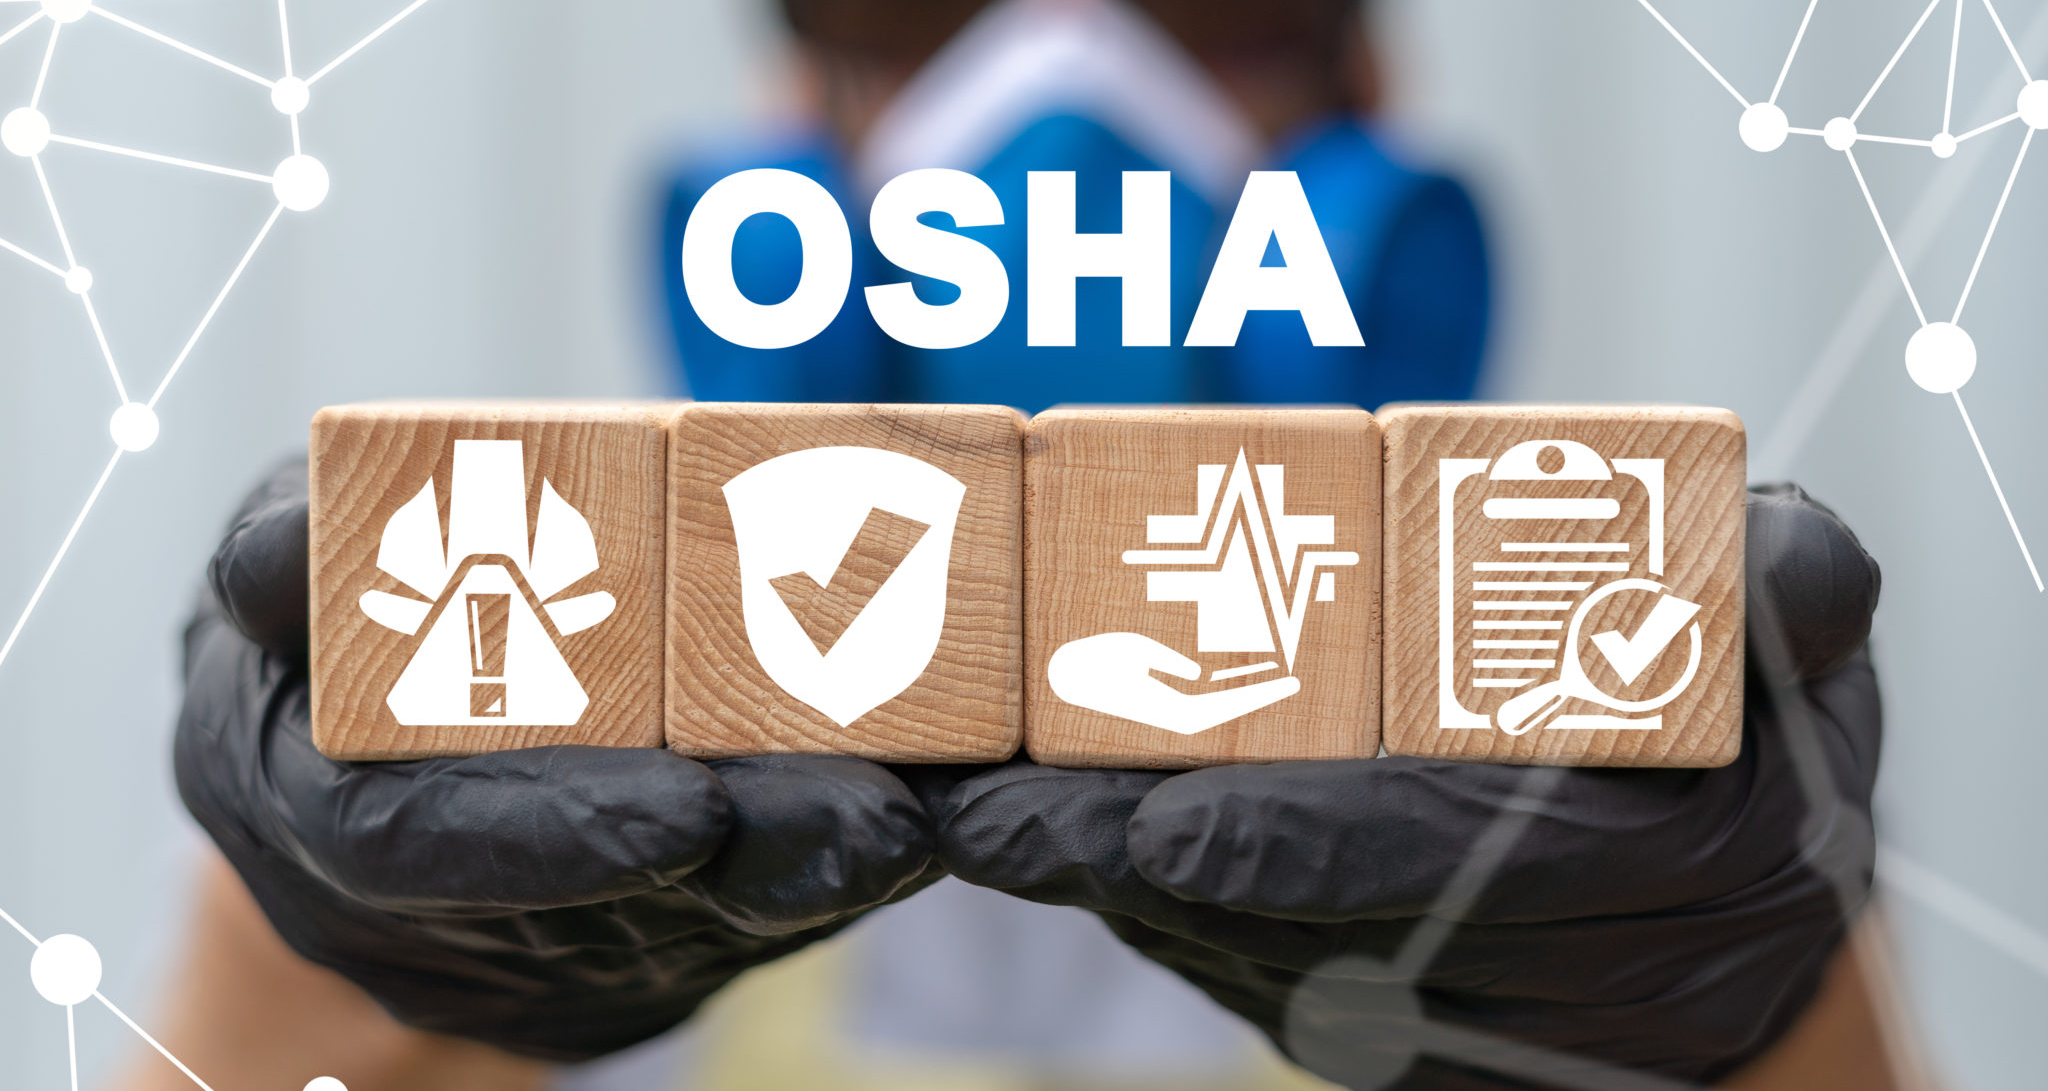 Institute awarded OSHA grant to continue development of new safety